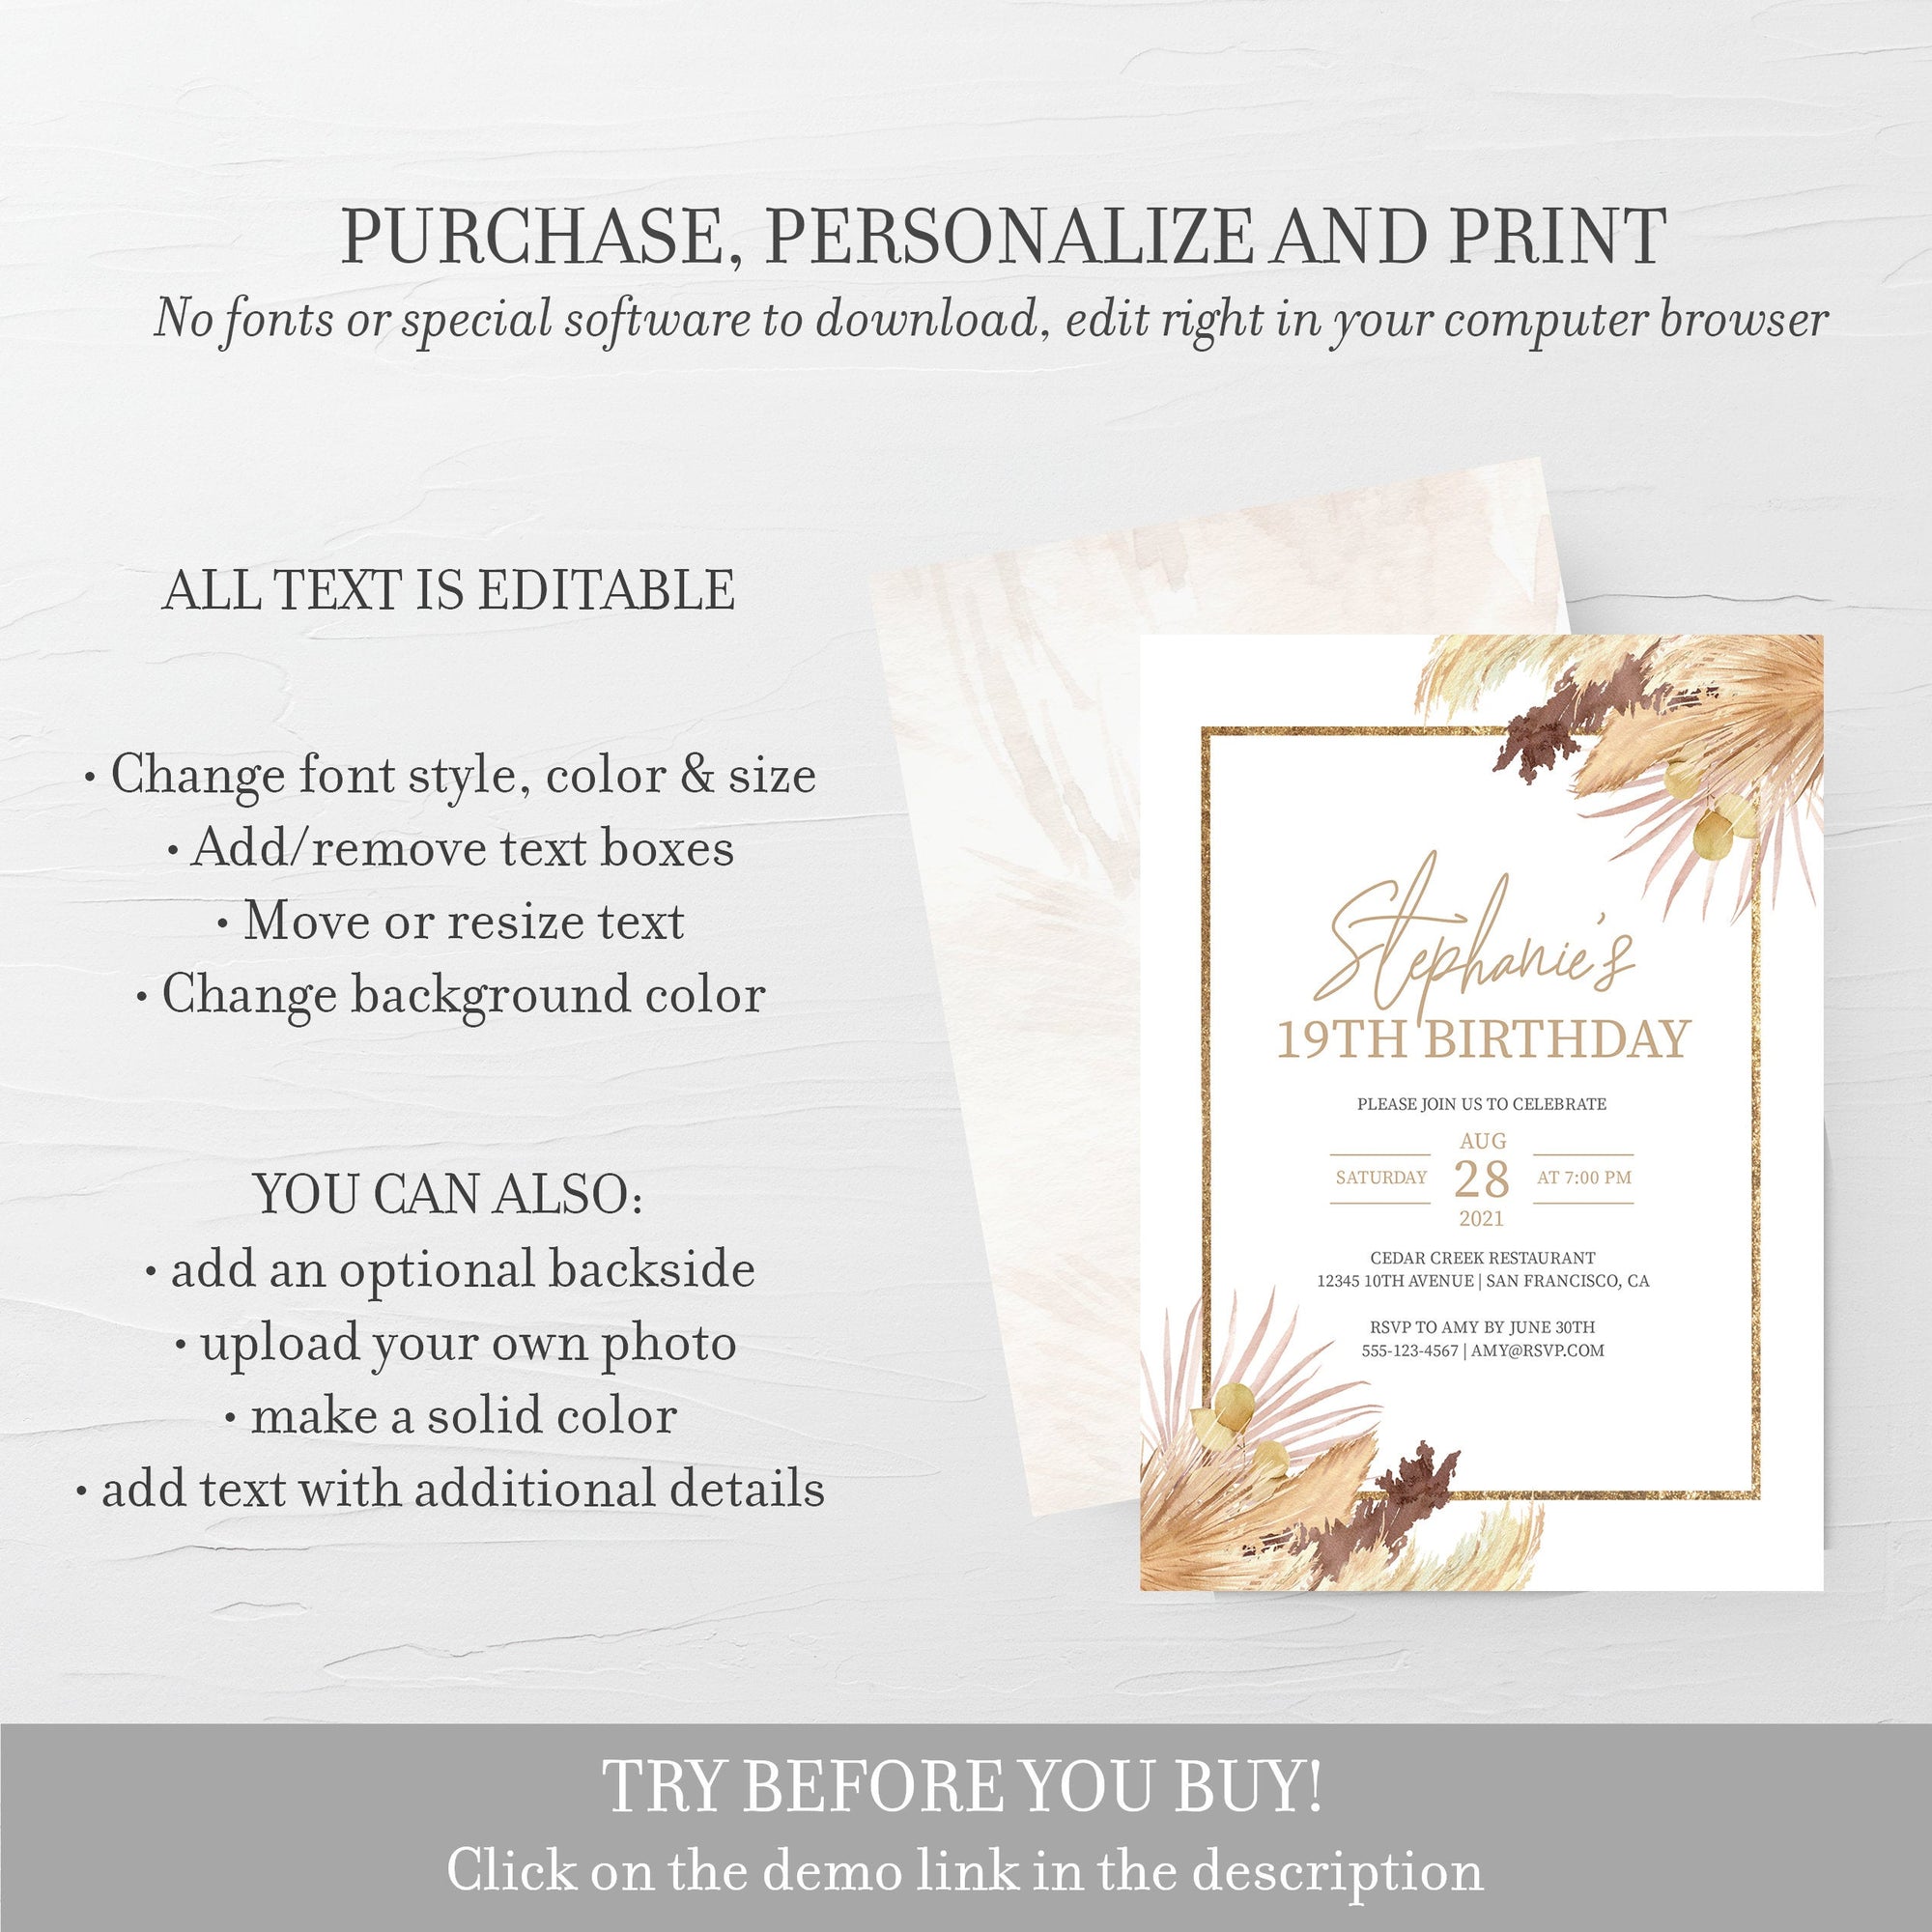 Pampas 19th Birthday Invitation For Women, Printable 19th Birthday Party Invitation, Bohemian 19th Birthday Invite, INSTANT DOWNLOAD DP100